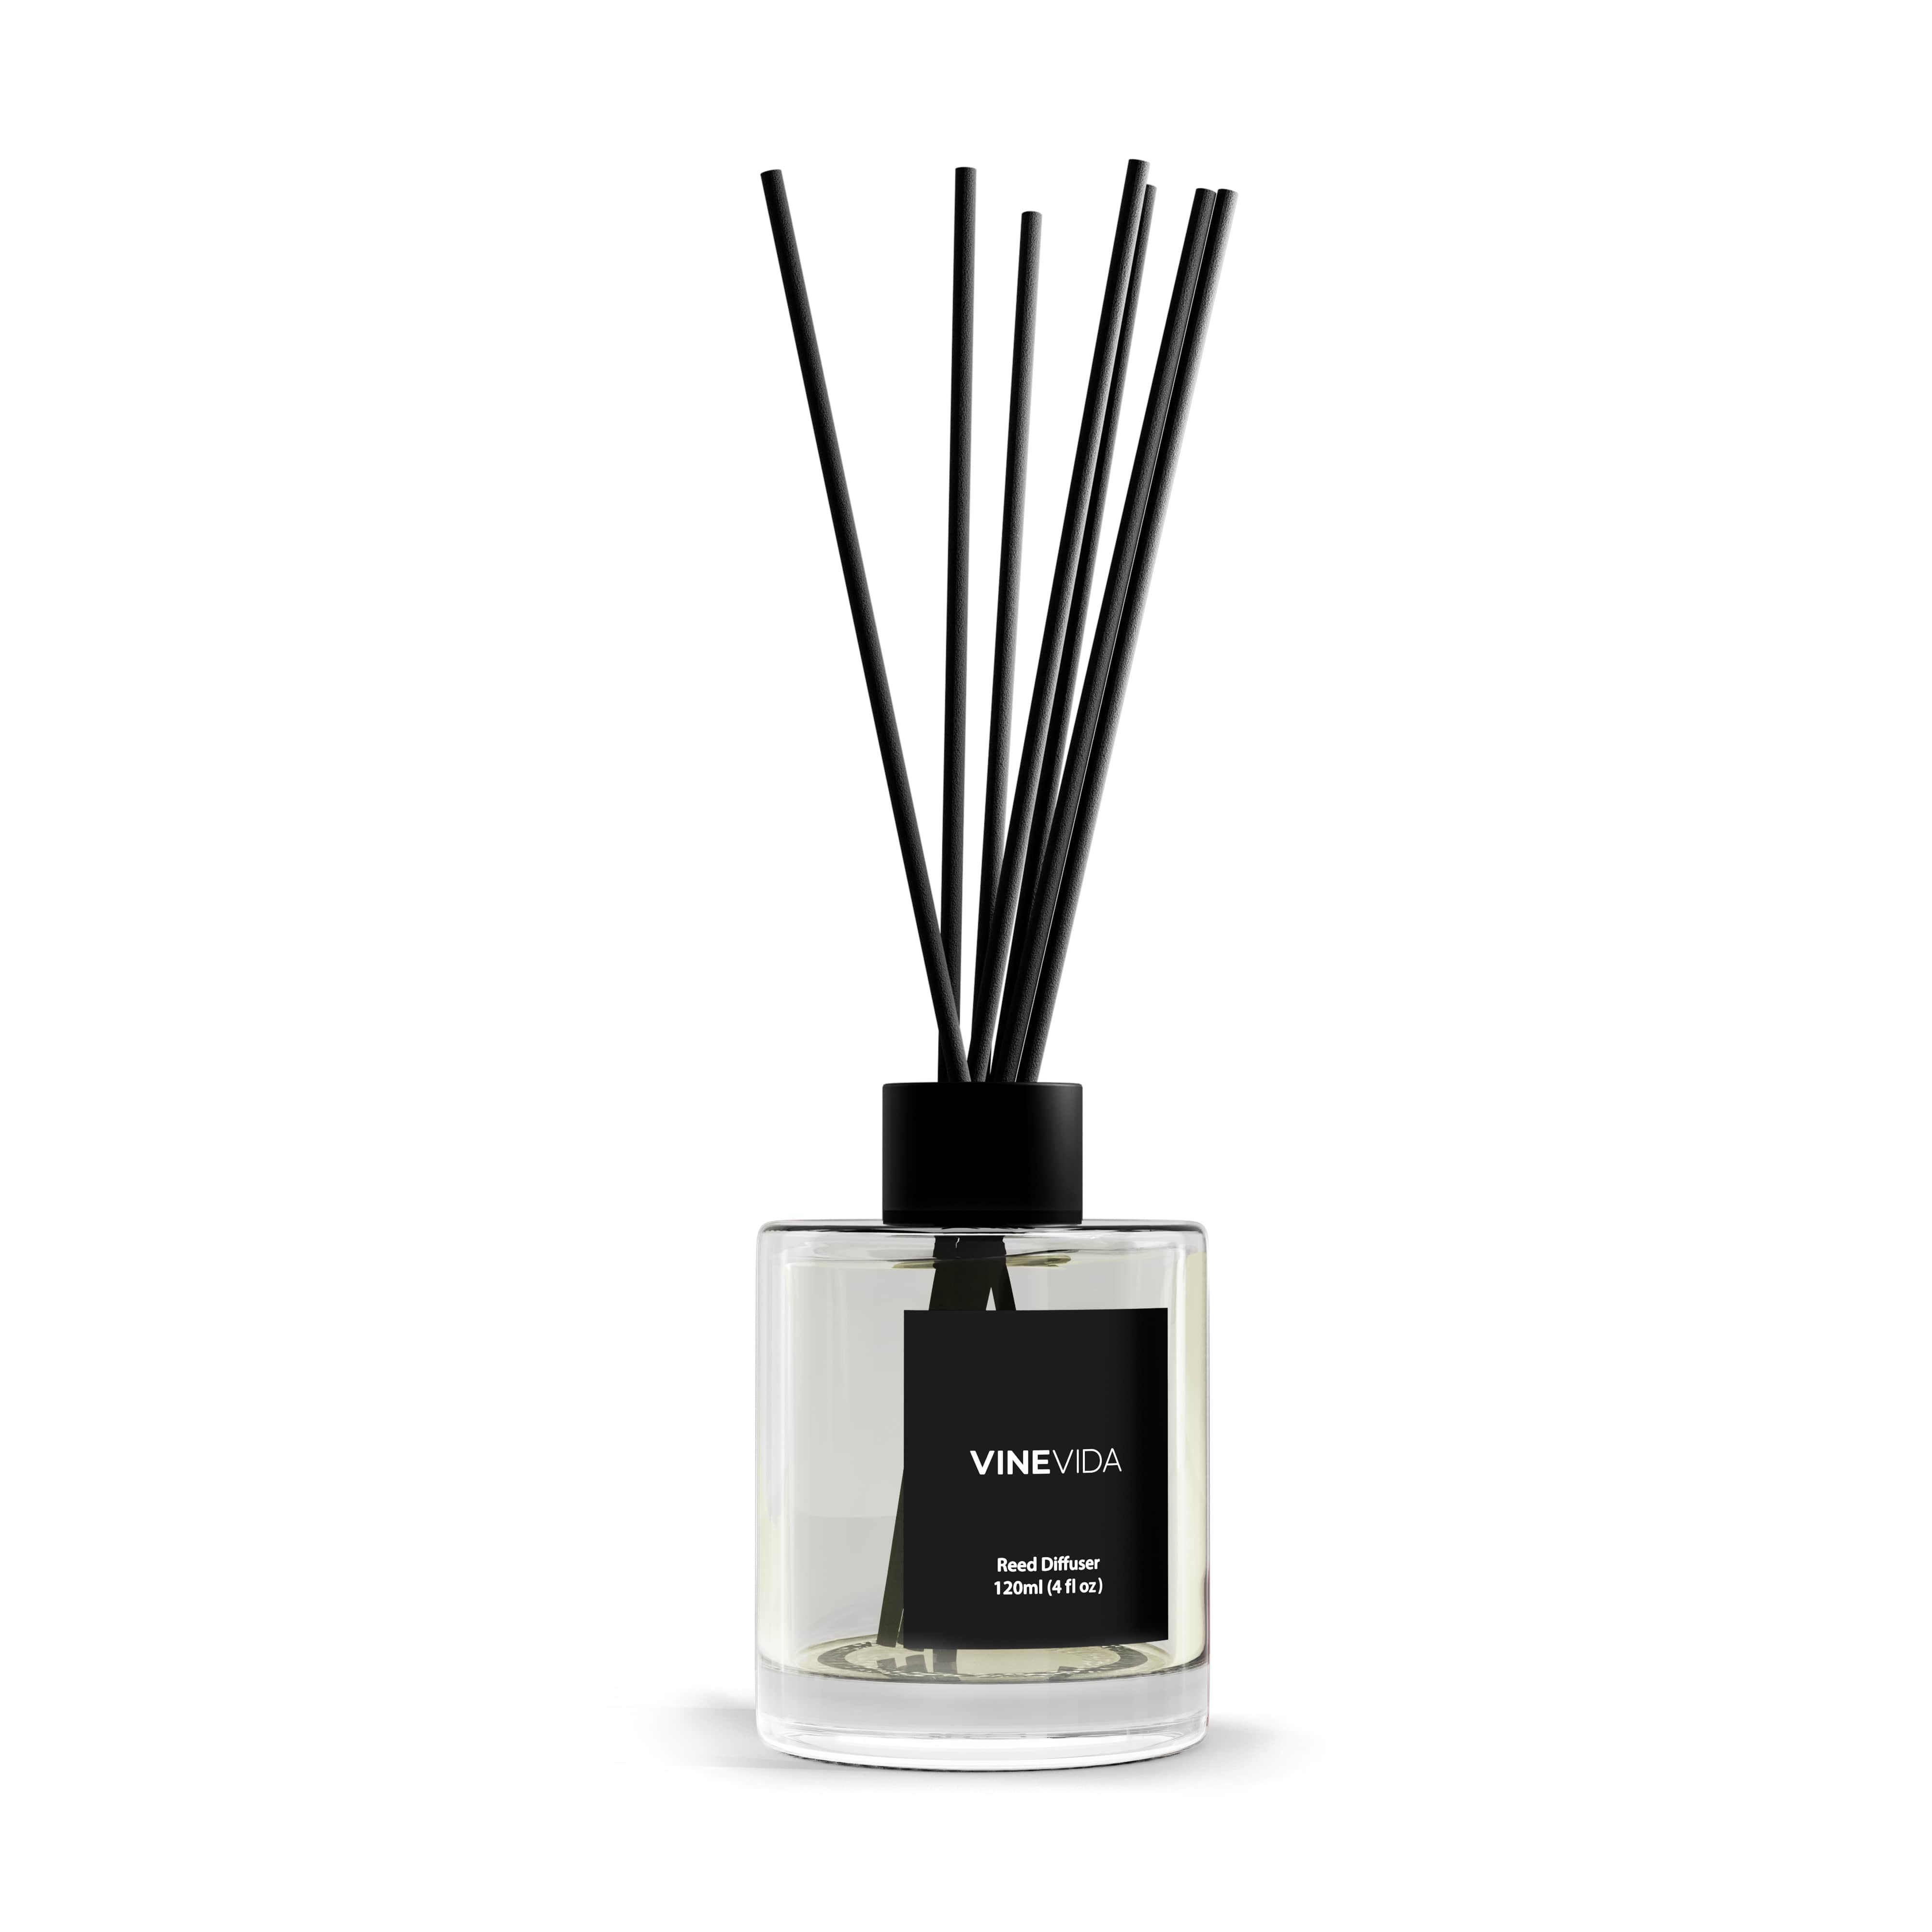 NO. 2000 Reed Diffuser - Inspired by: Fierce by Abercrombie & Fitch